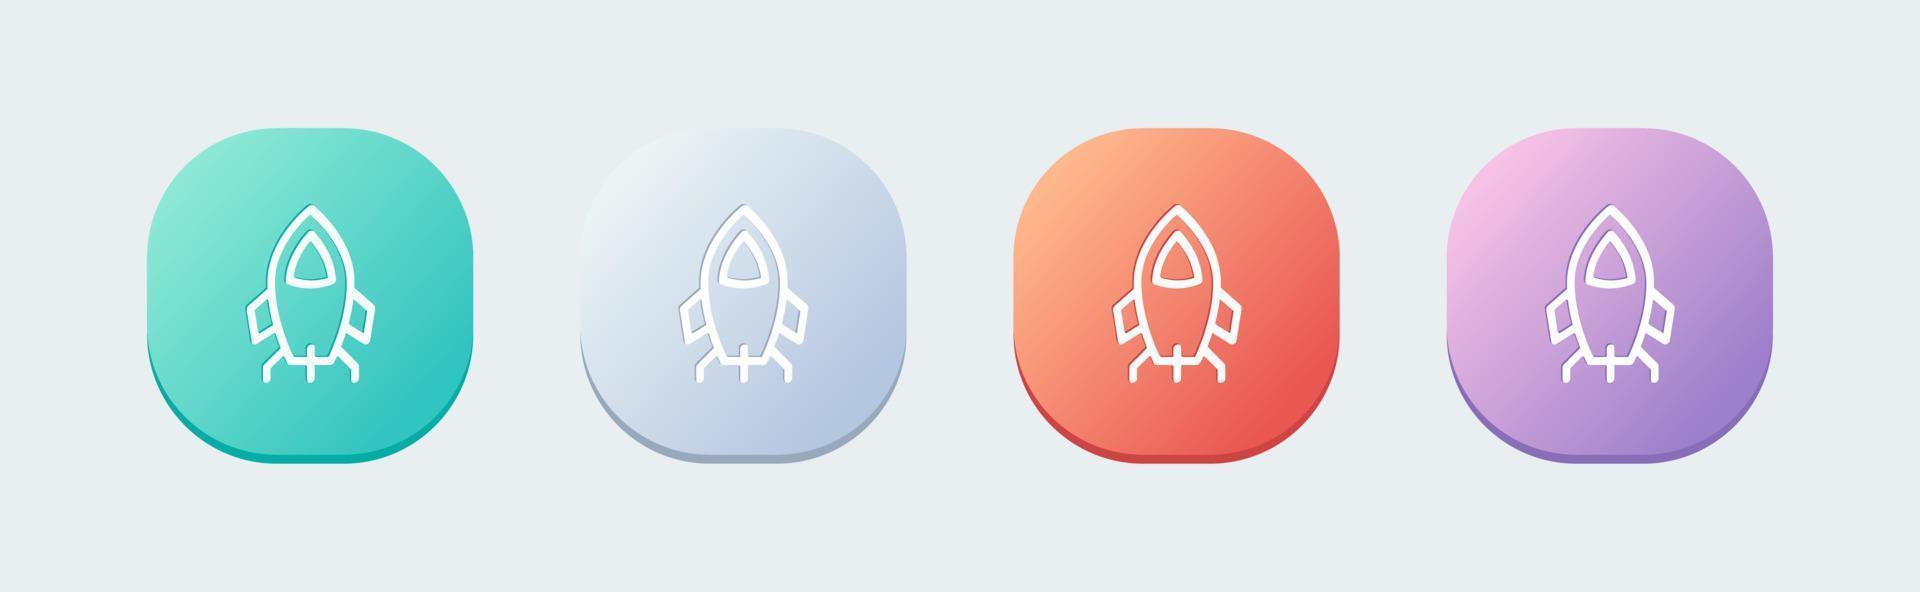 Rocket line icon in flat design style. Space ship signs vector illustration.